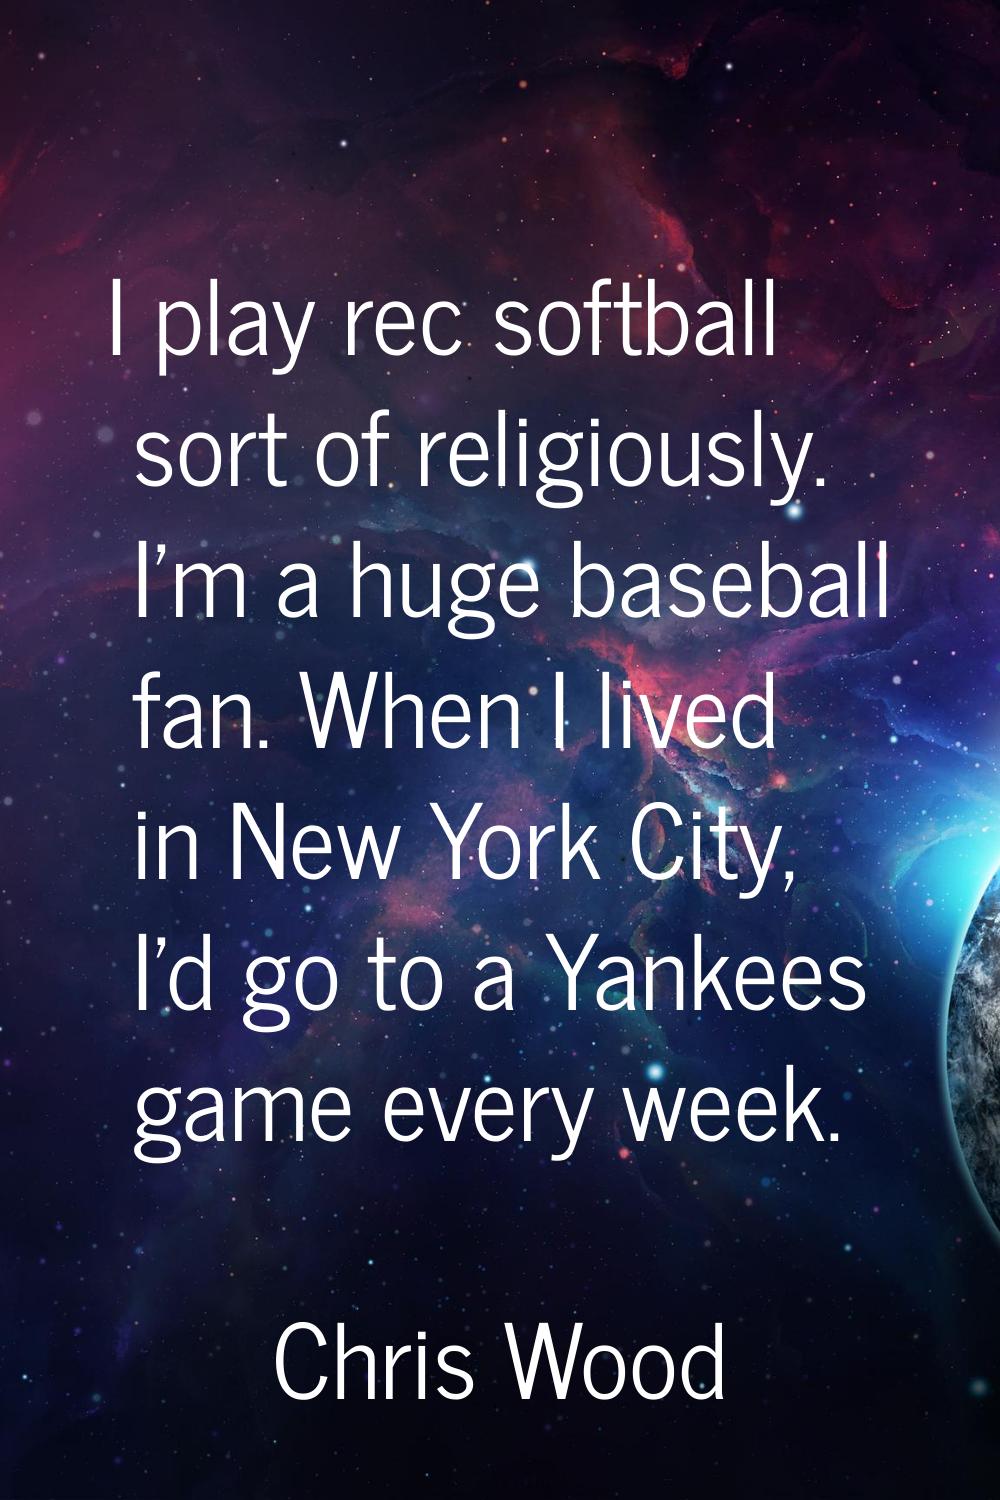 I play rec softball sort of religiously. I'm a huge baseball fan. When I lived in New York City, I'